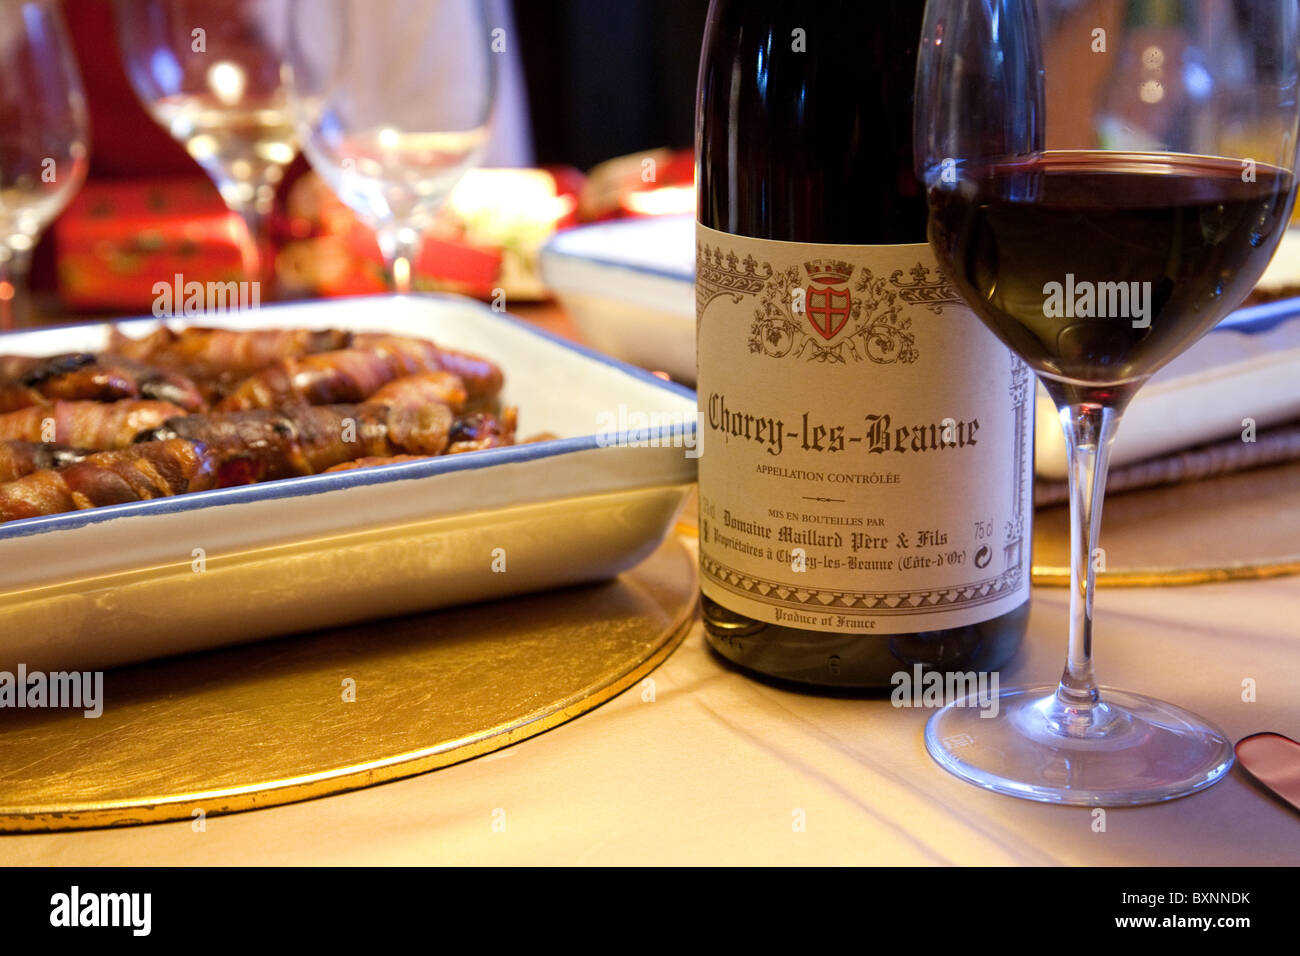 Red burgundy wine and sausages on the dinner table on Christmas day, UK Stock Photo